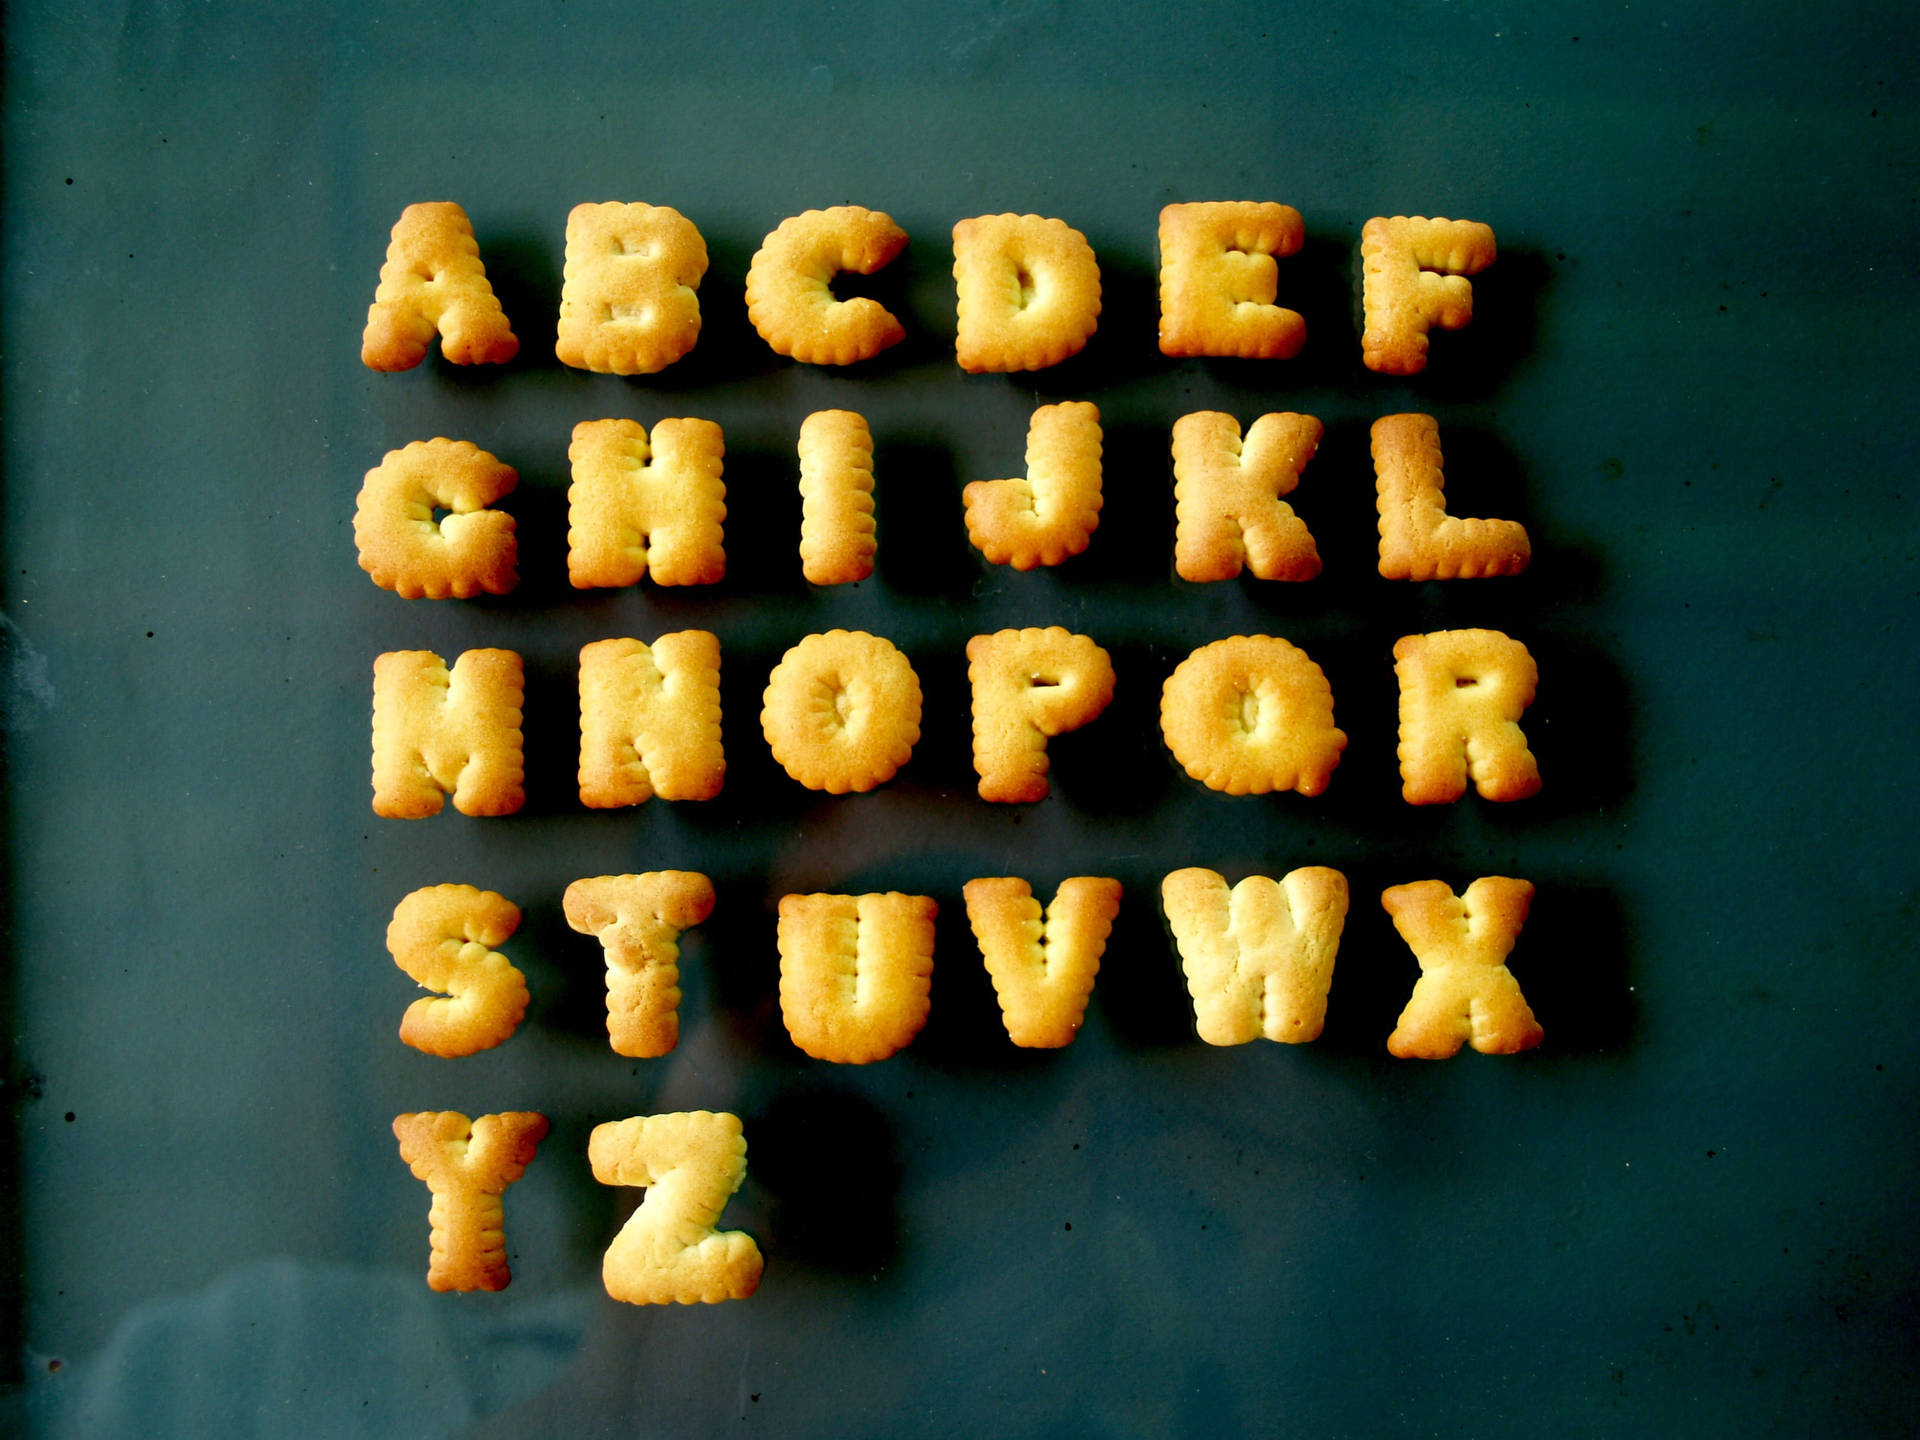 Educational Abc Alphabets Made From Crackers Background